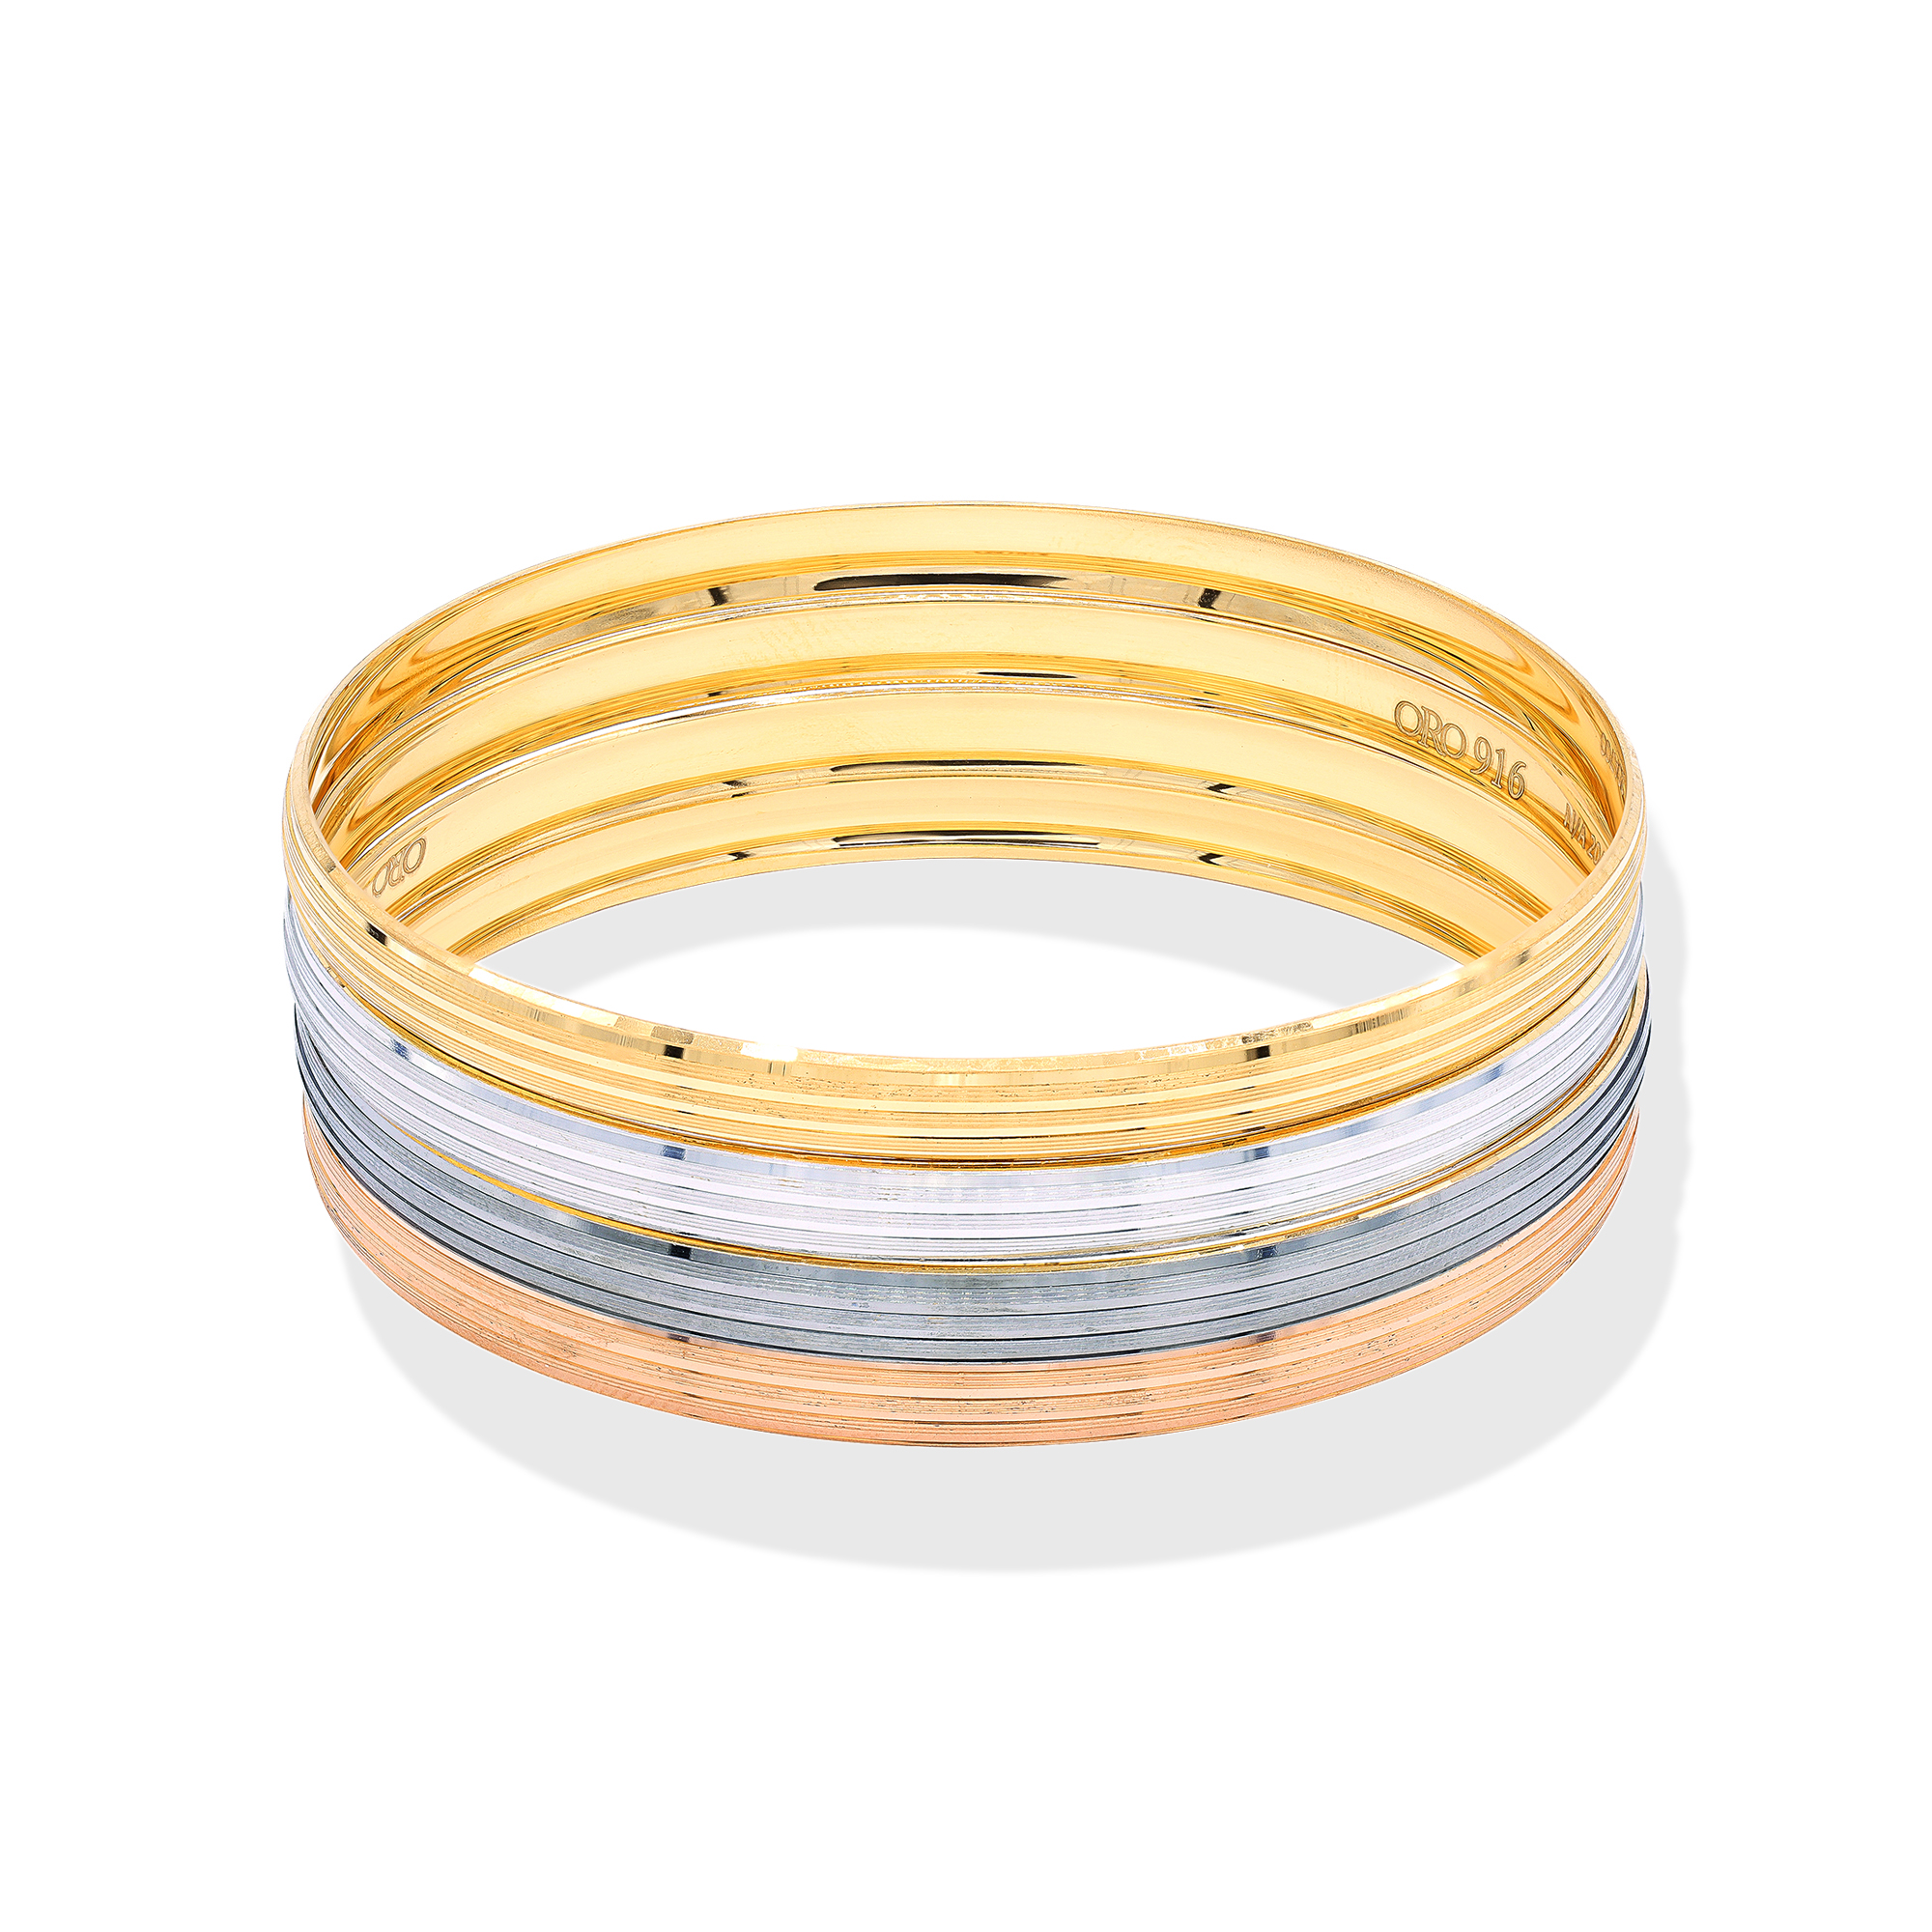 Daily wear gold bangles design jewellery collection in 2022 - The Caratlane